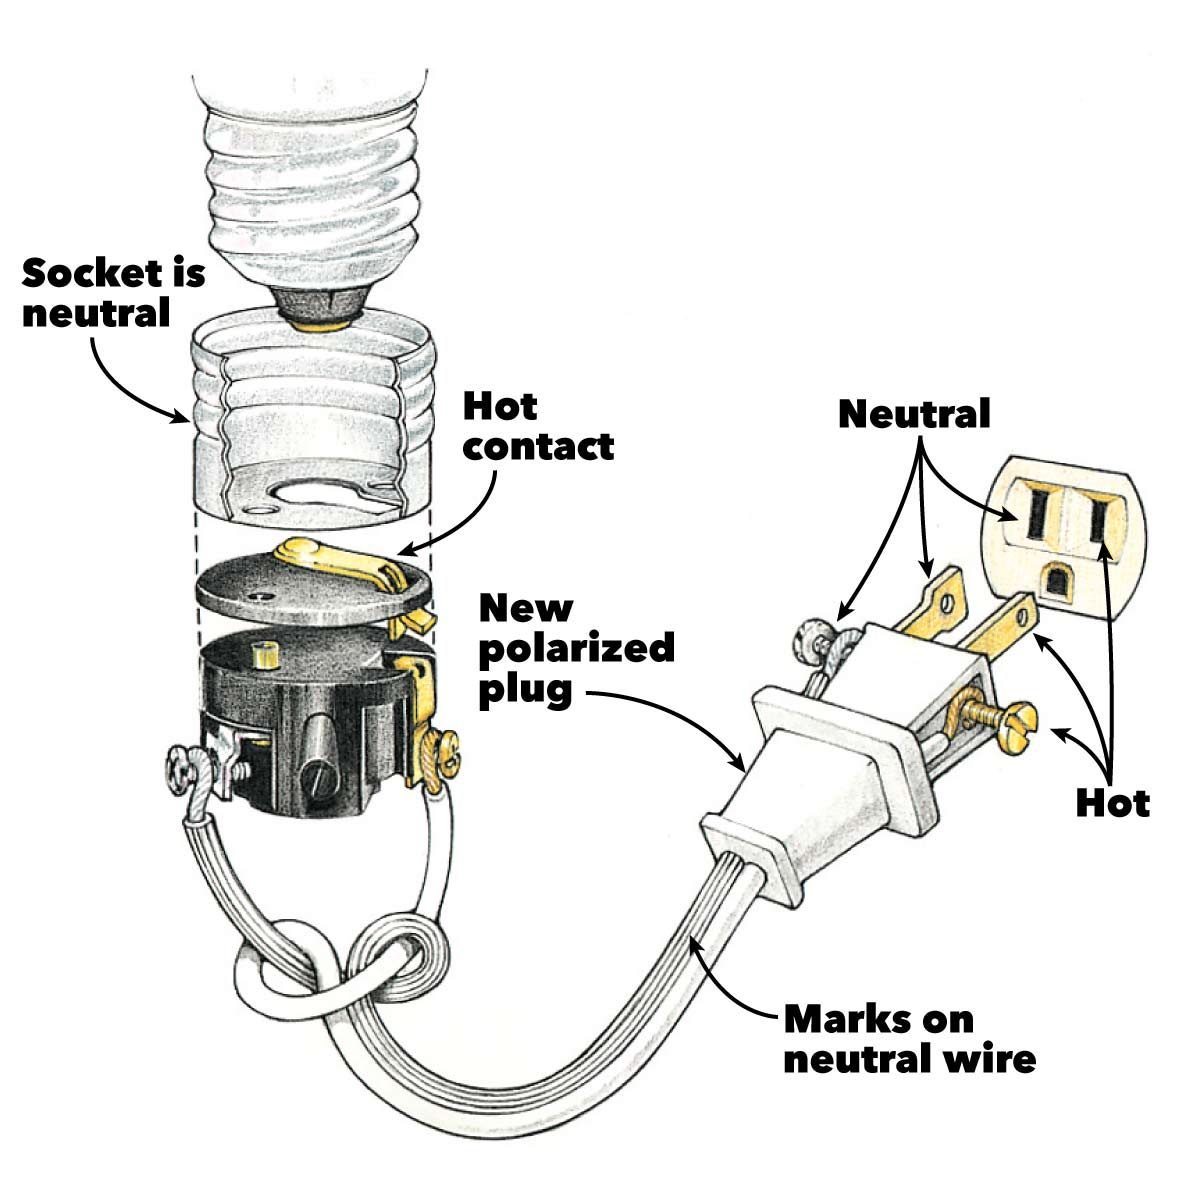 Wiring a Plug: Replacing a Plug and Rewiring Electronics | Family Handyman  3 Prong Extension Cord Wiring Diagram    The Family Handyman